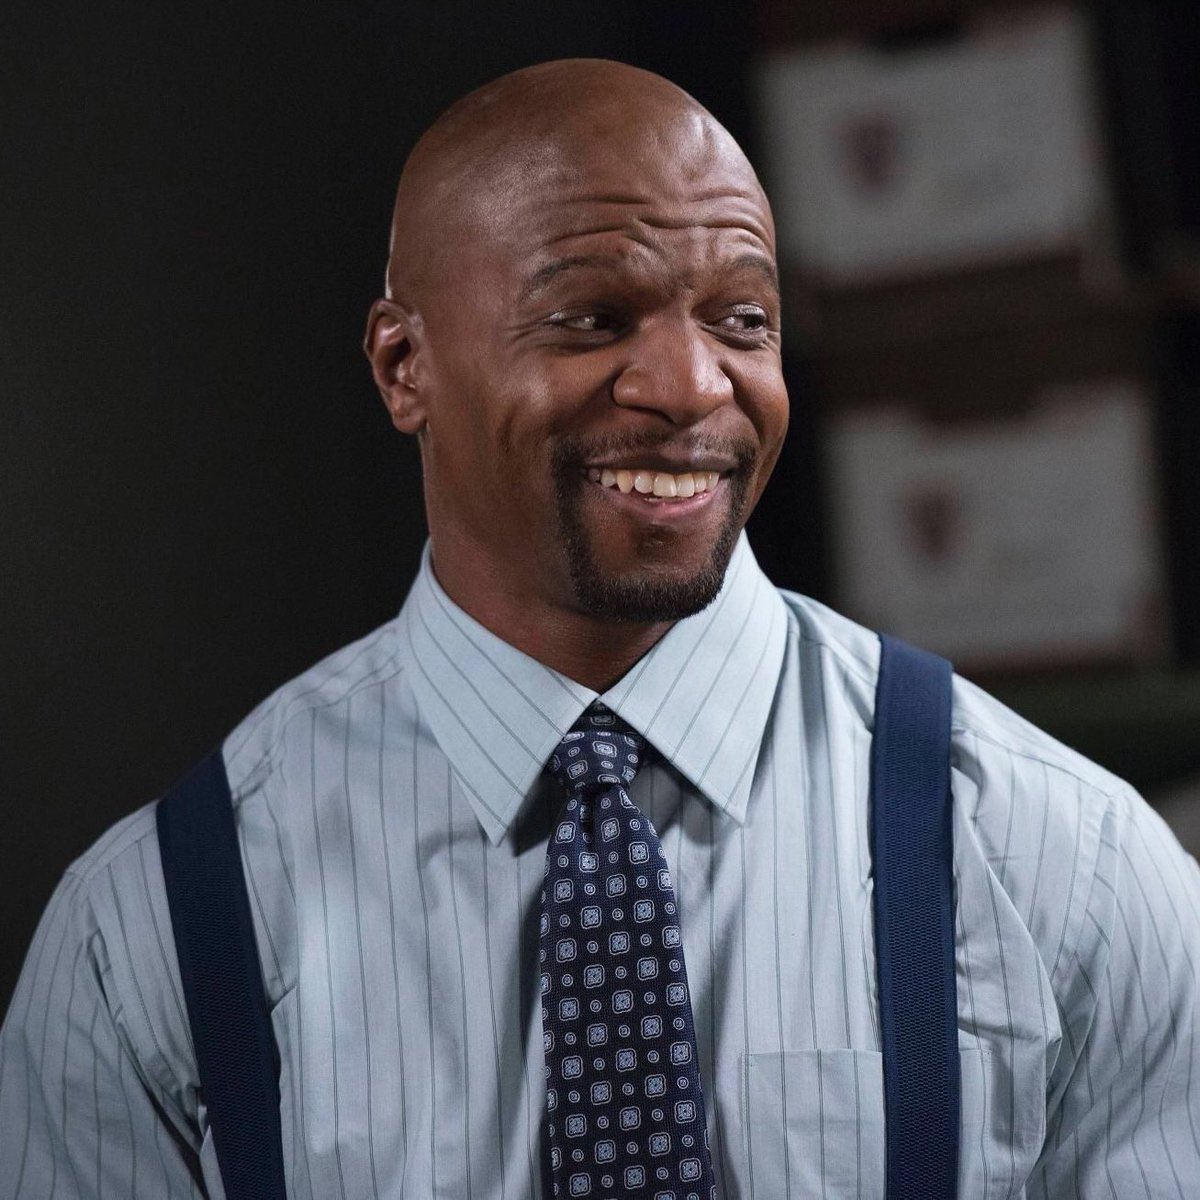 terry jeffords as bruce banner  - you’re terrfied of them  - is actually the biggest softie  - just wants love